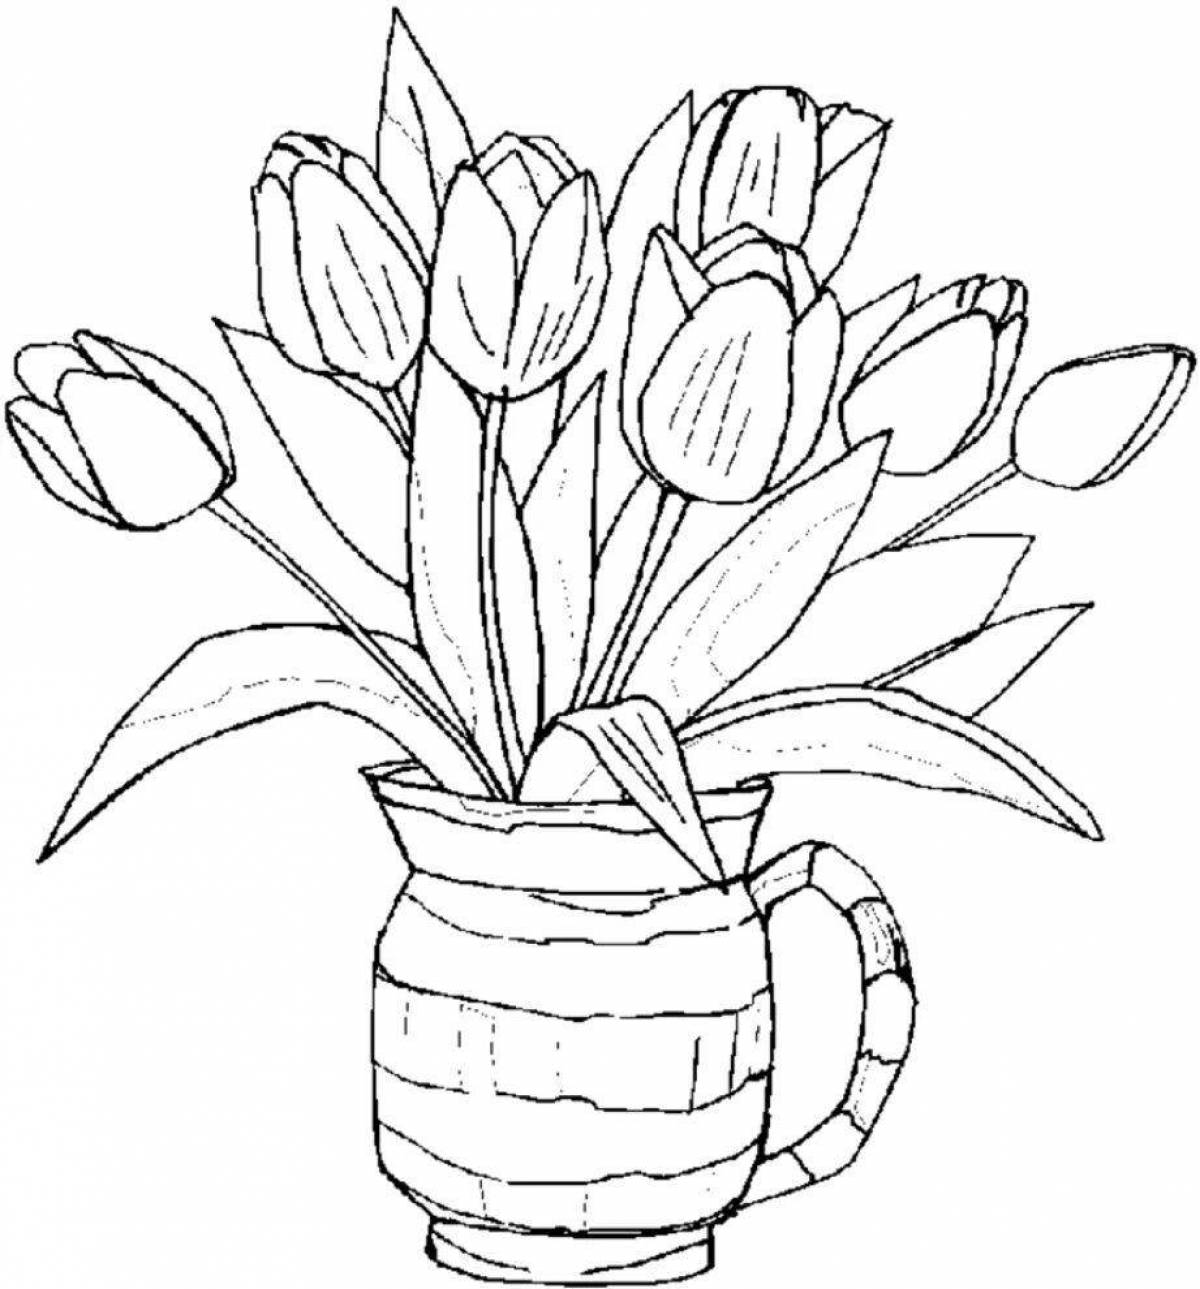 Coloring page funny tulips for March 8